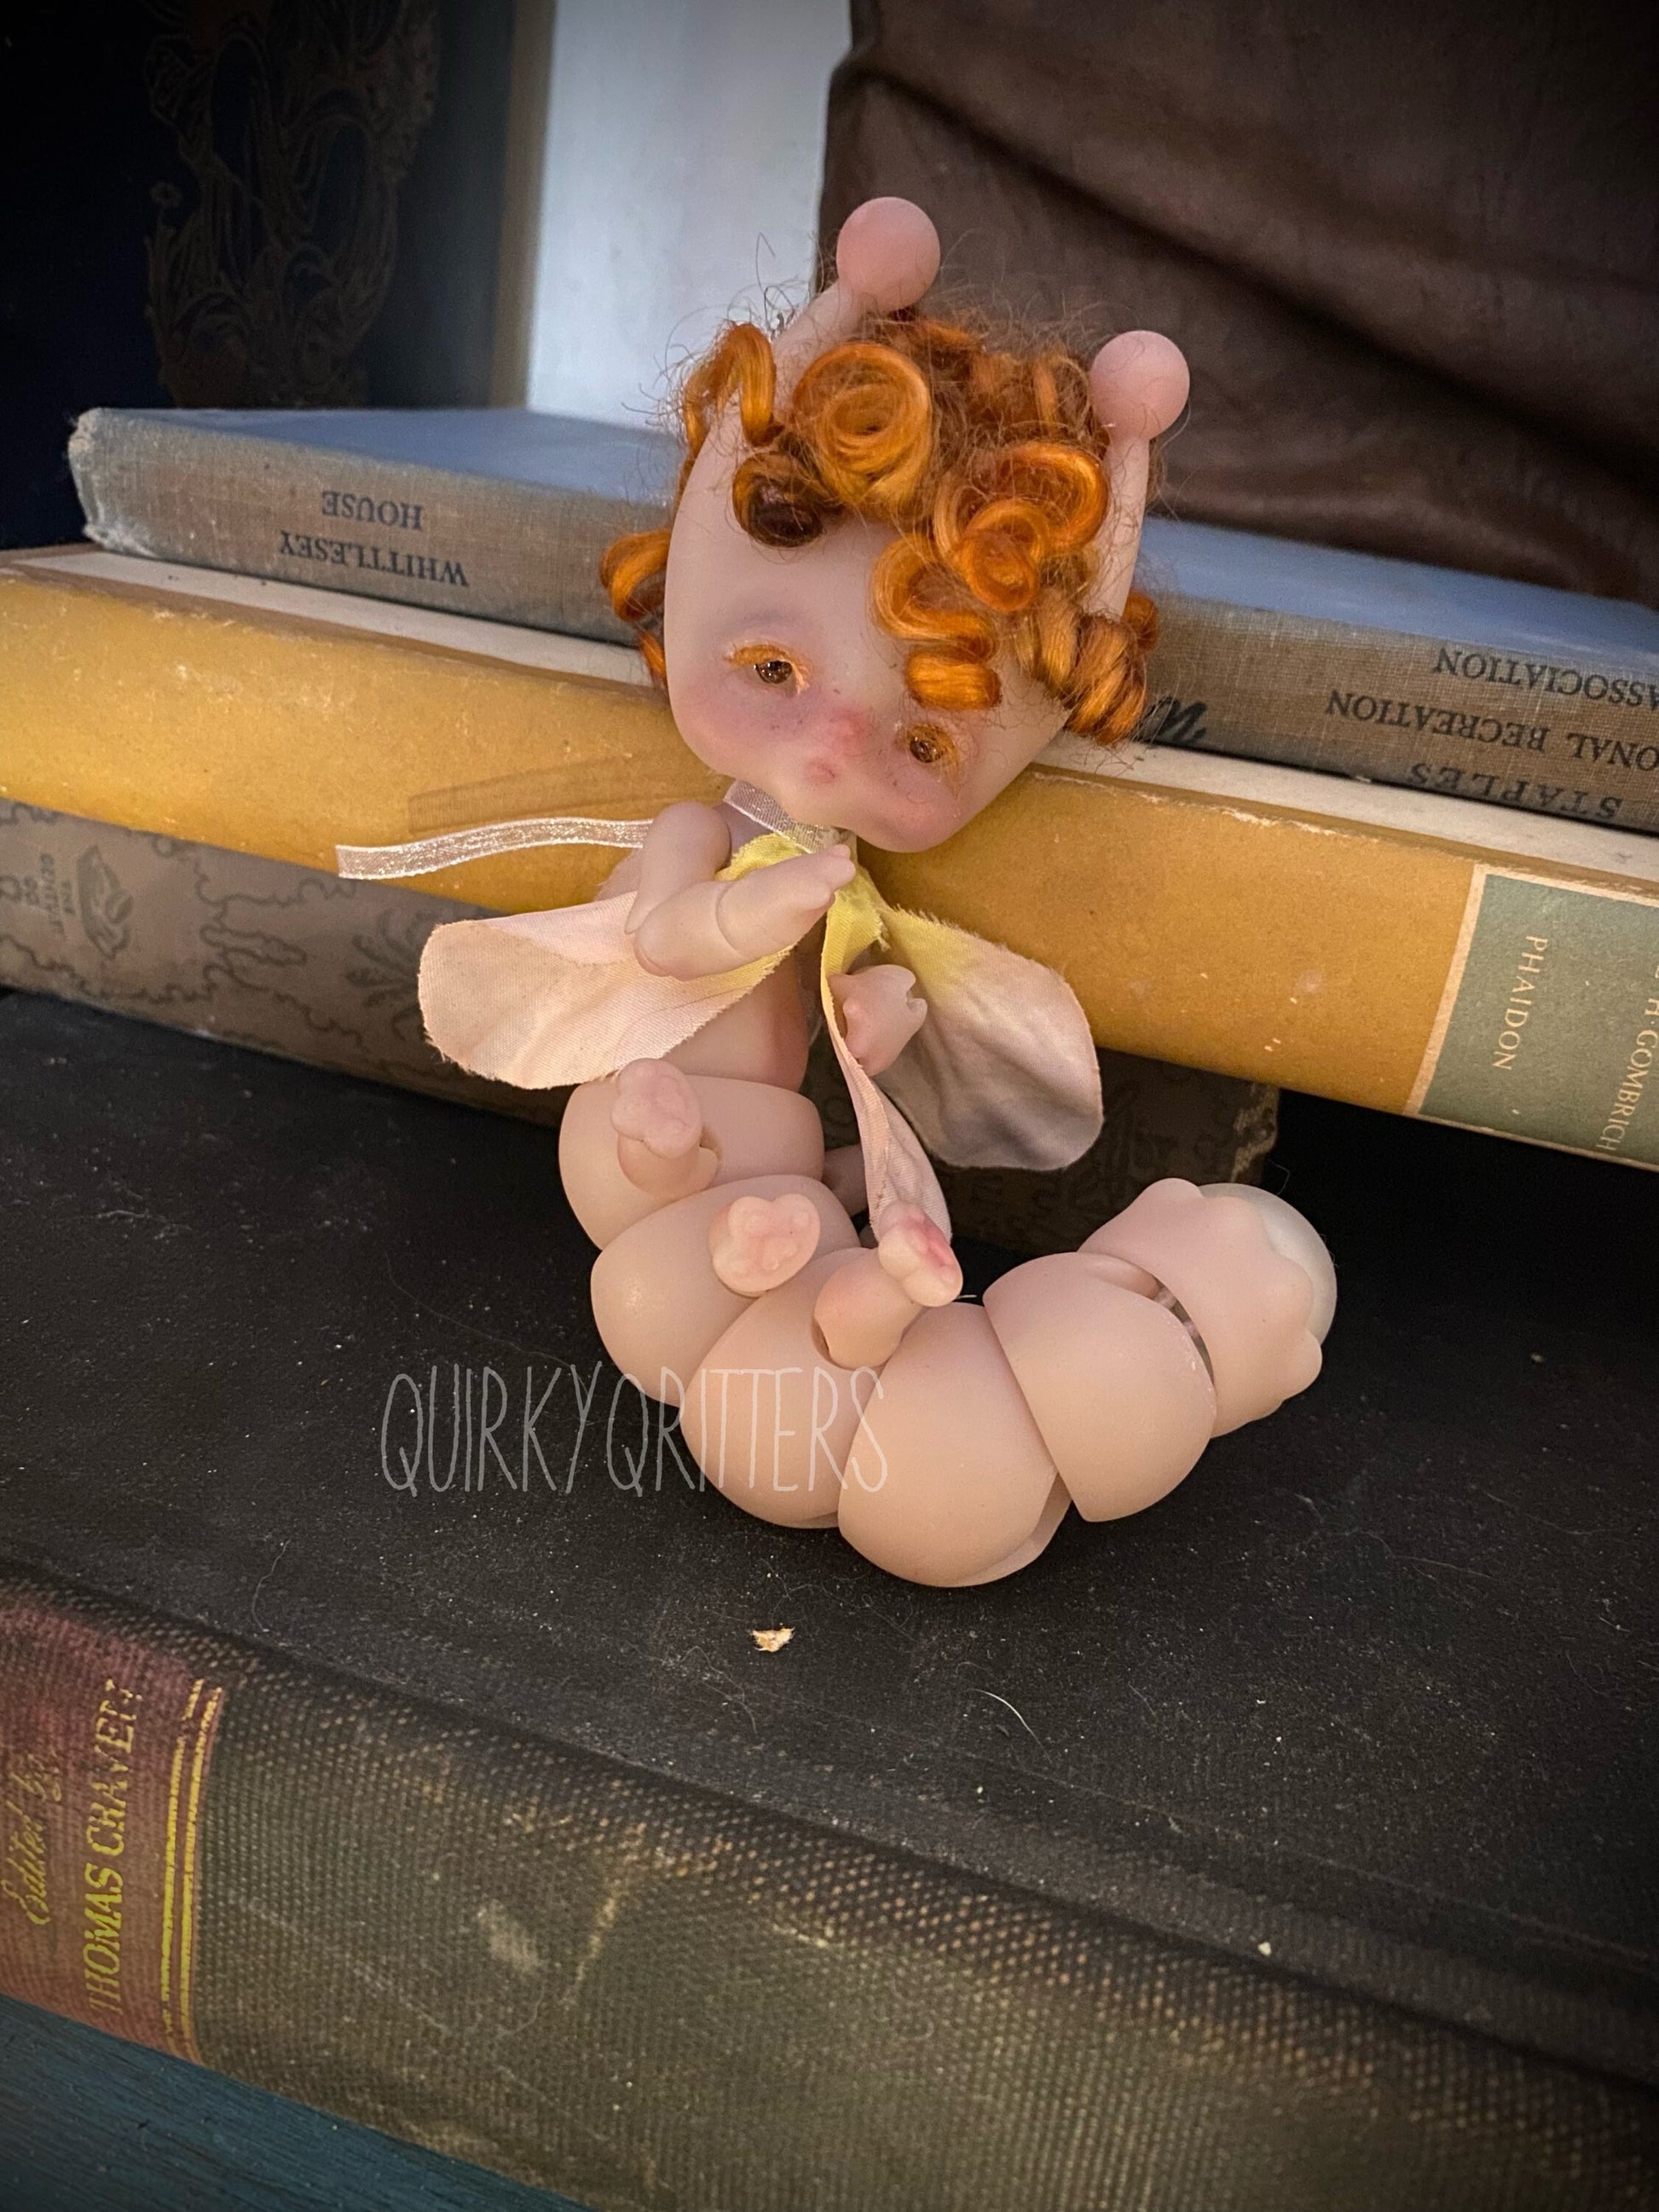 Bookworm: The Resin 3D Printed Book Fairy